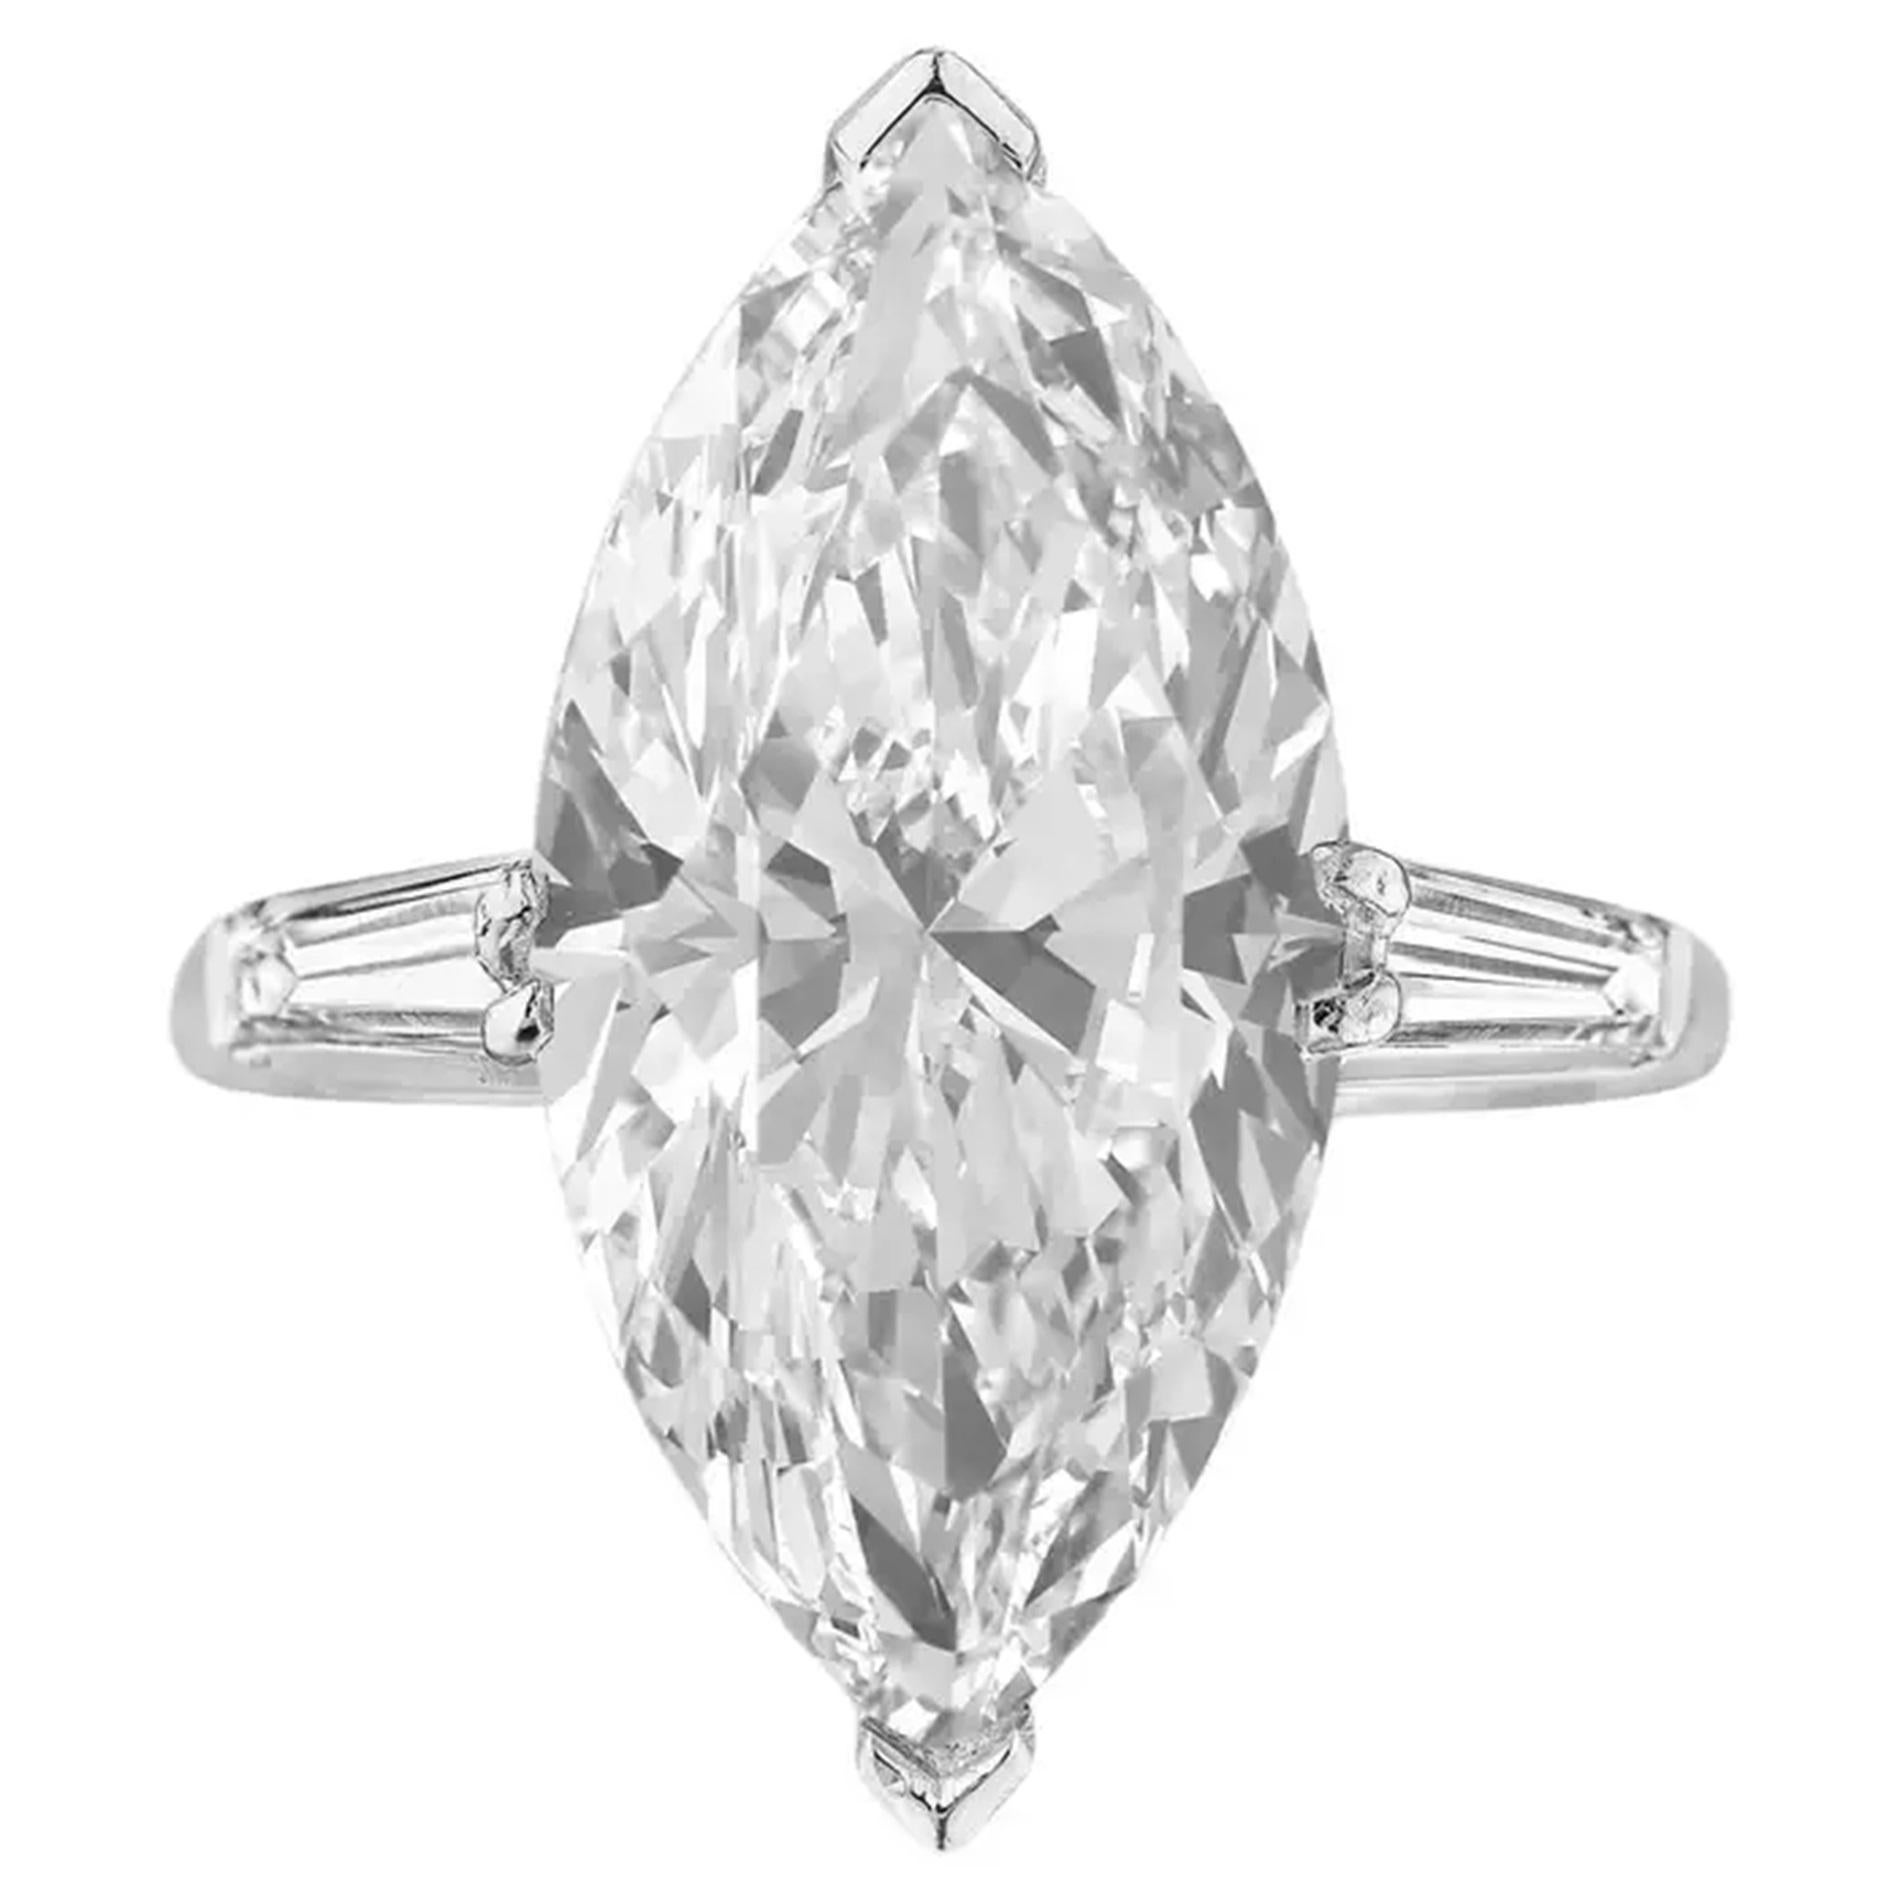 Presenting the Exceptional GIA Certified 6.06 Carat Marquise Diamond Ring, featuring a stunning 6-carat diamond with a longer ratio that enhances its graceful appearance. This remarkable gem is adorned with excellent polish and symmetry, ensuring